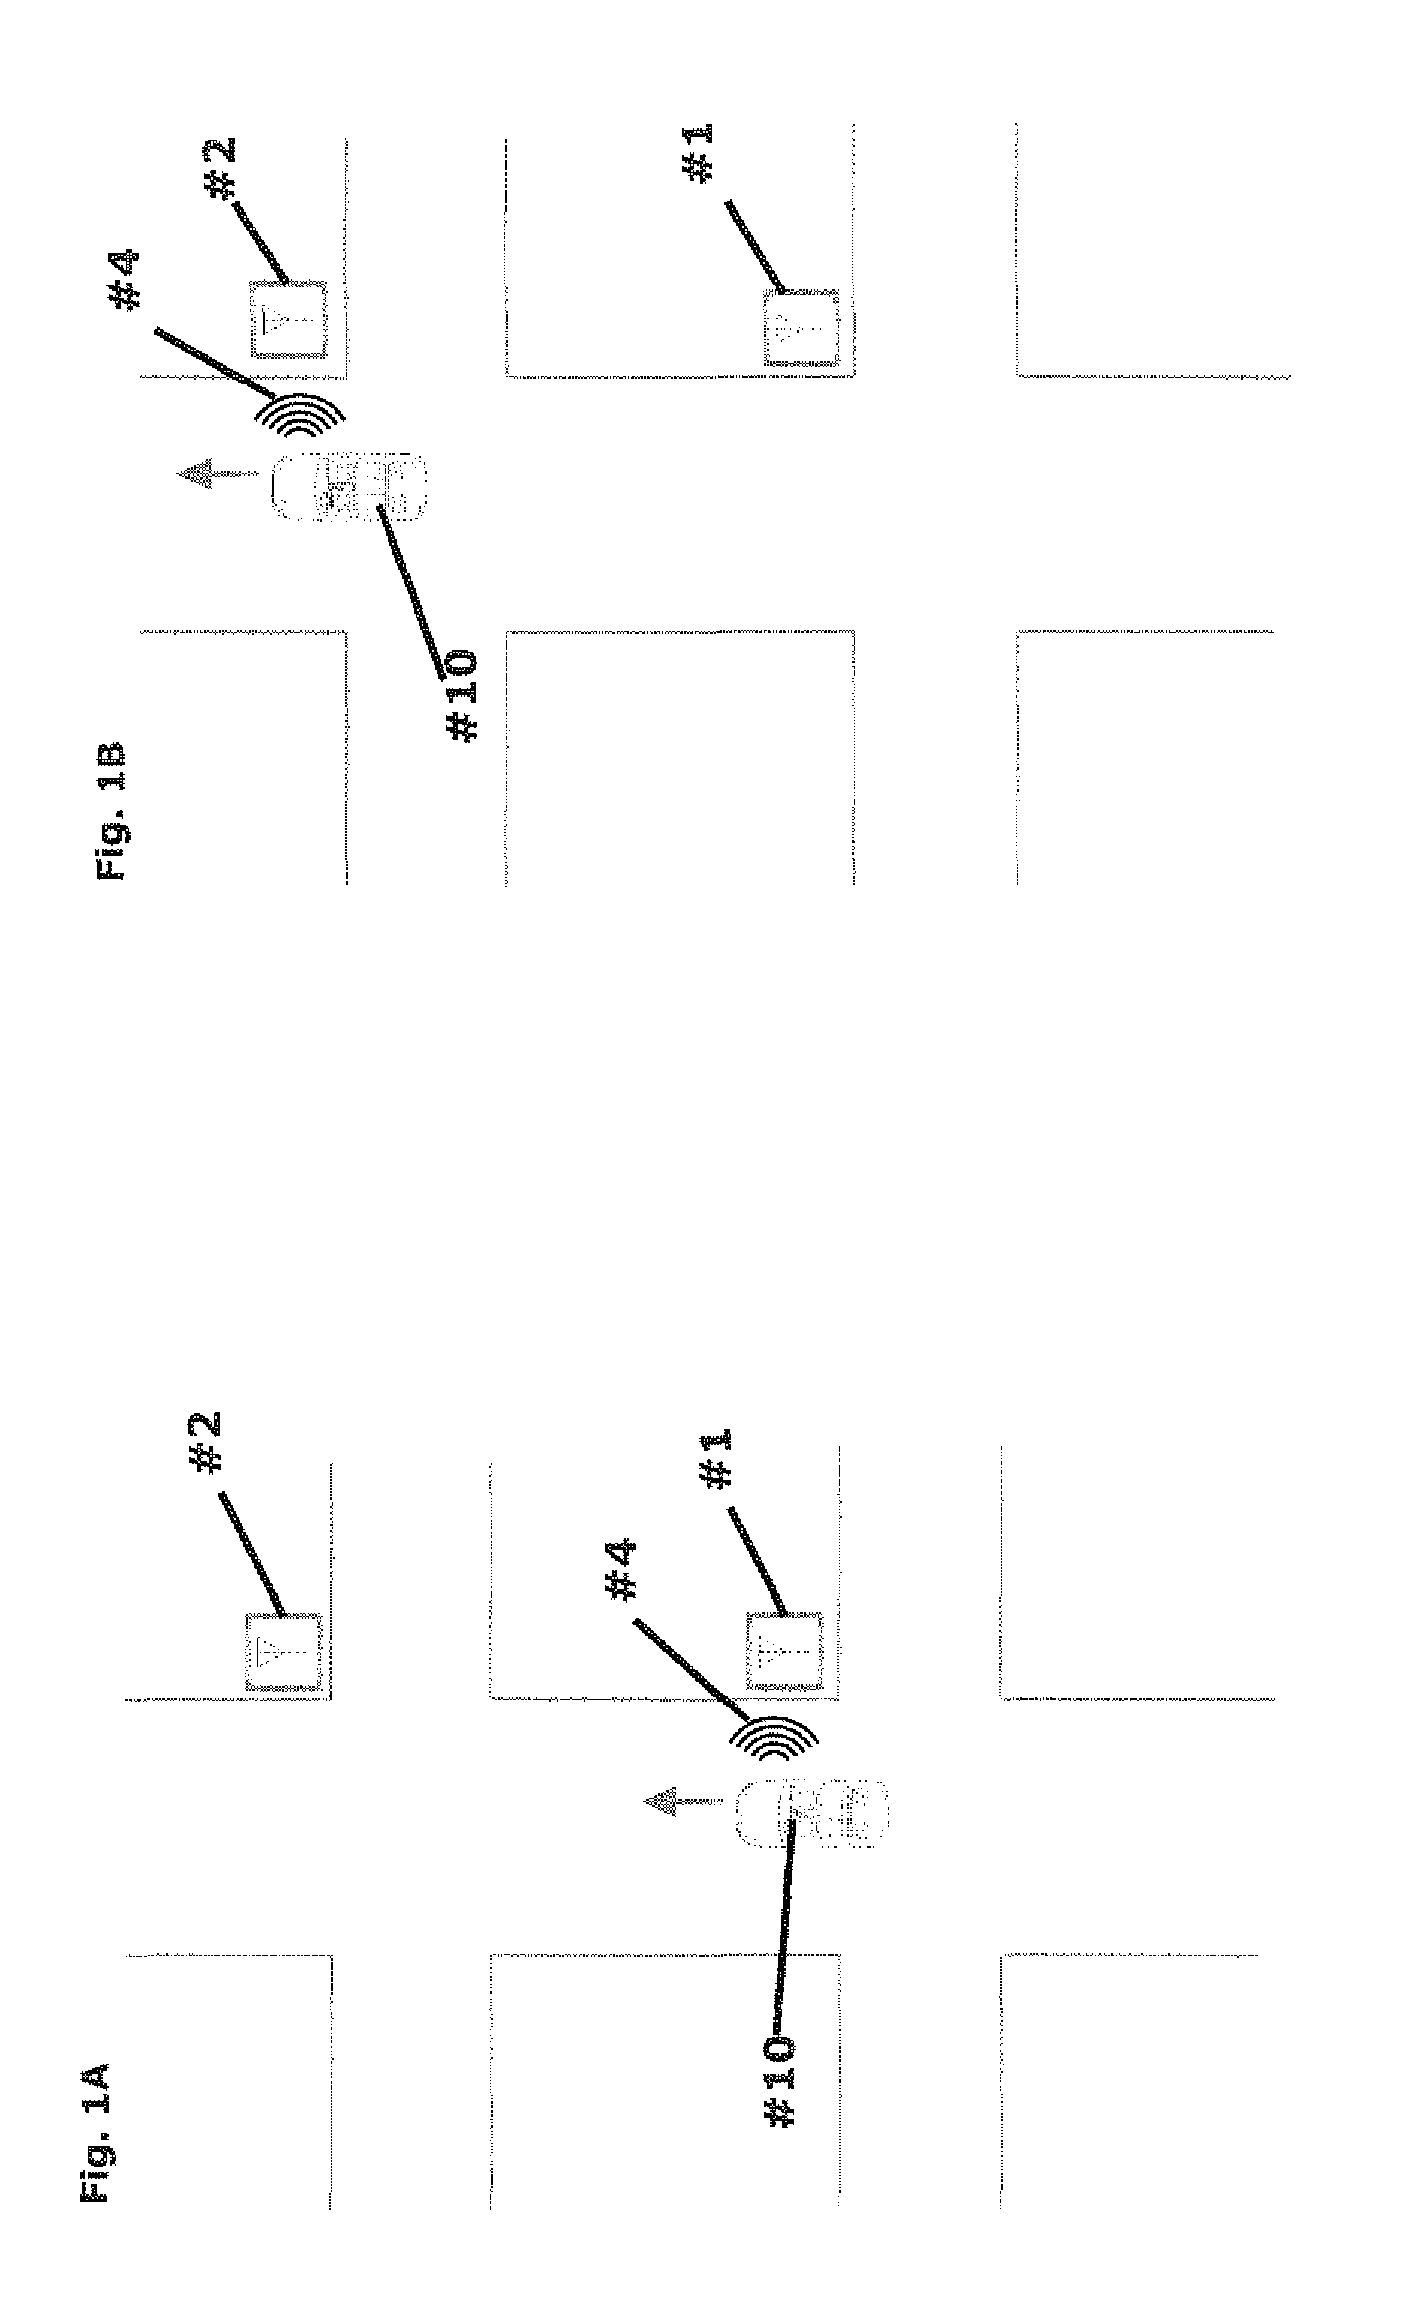 System for obtaining vehicular traffic flow data from a tire pressure monitoring system